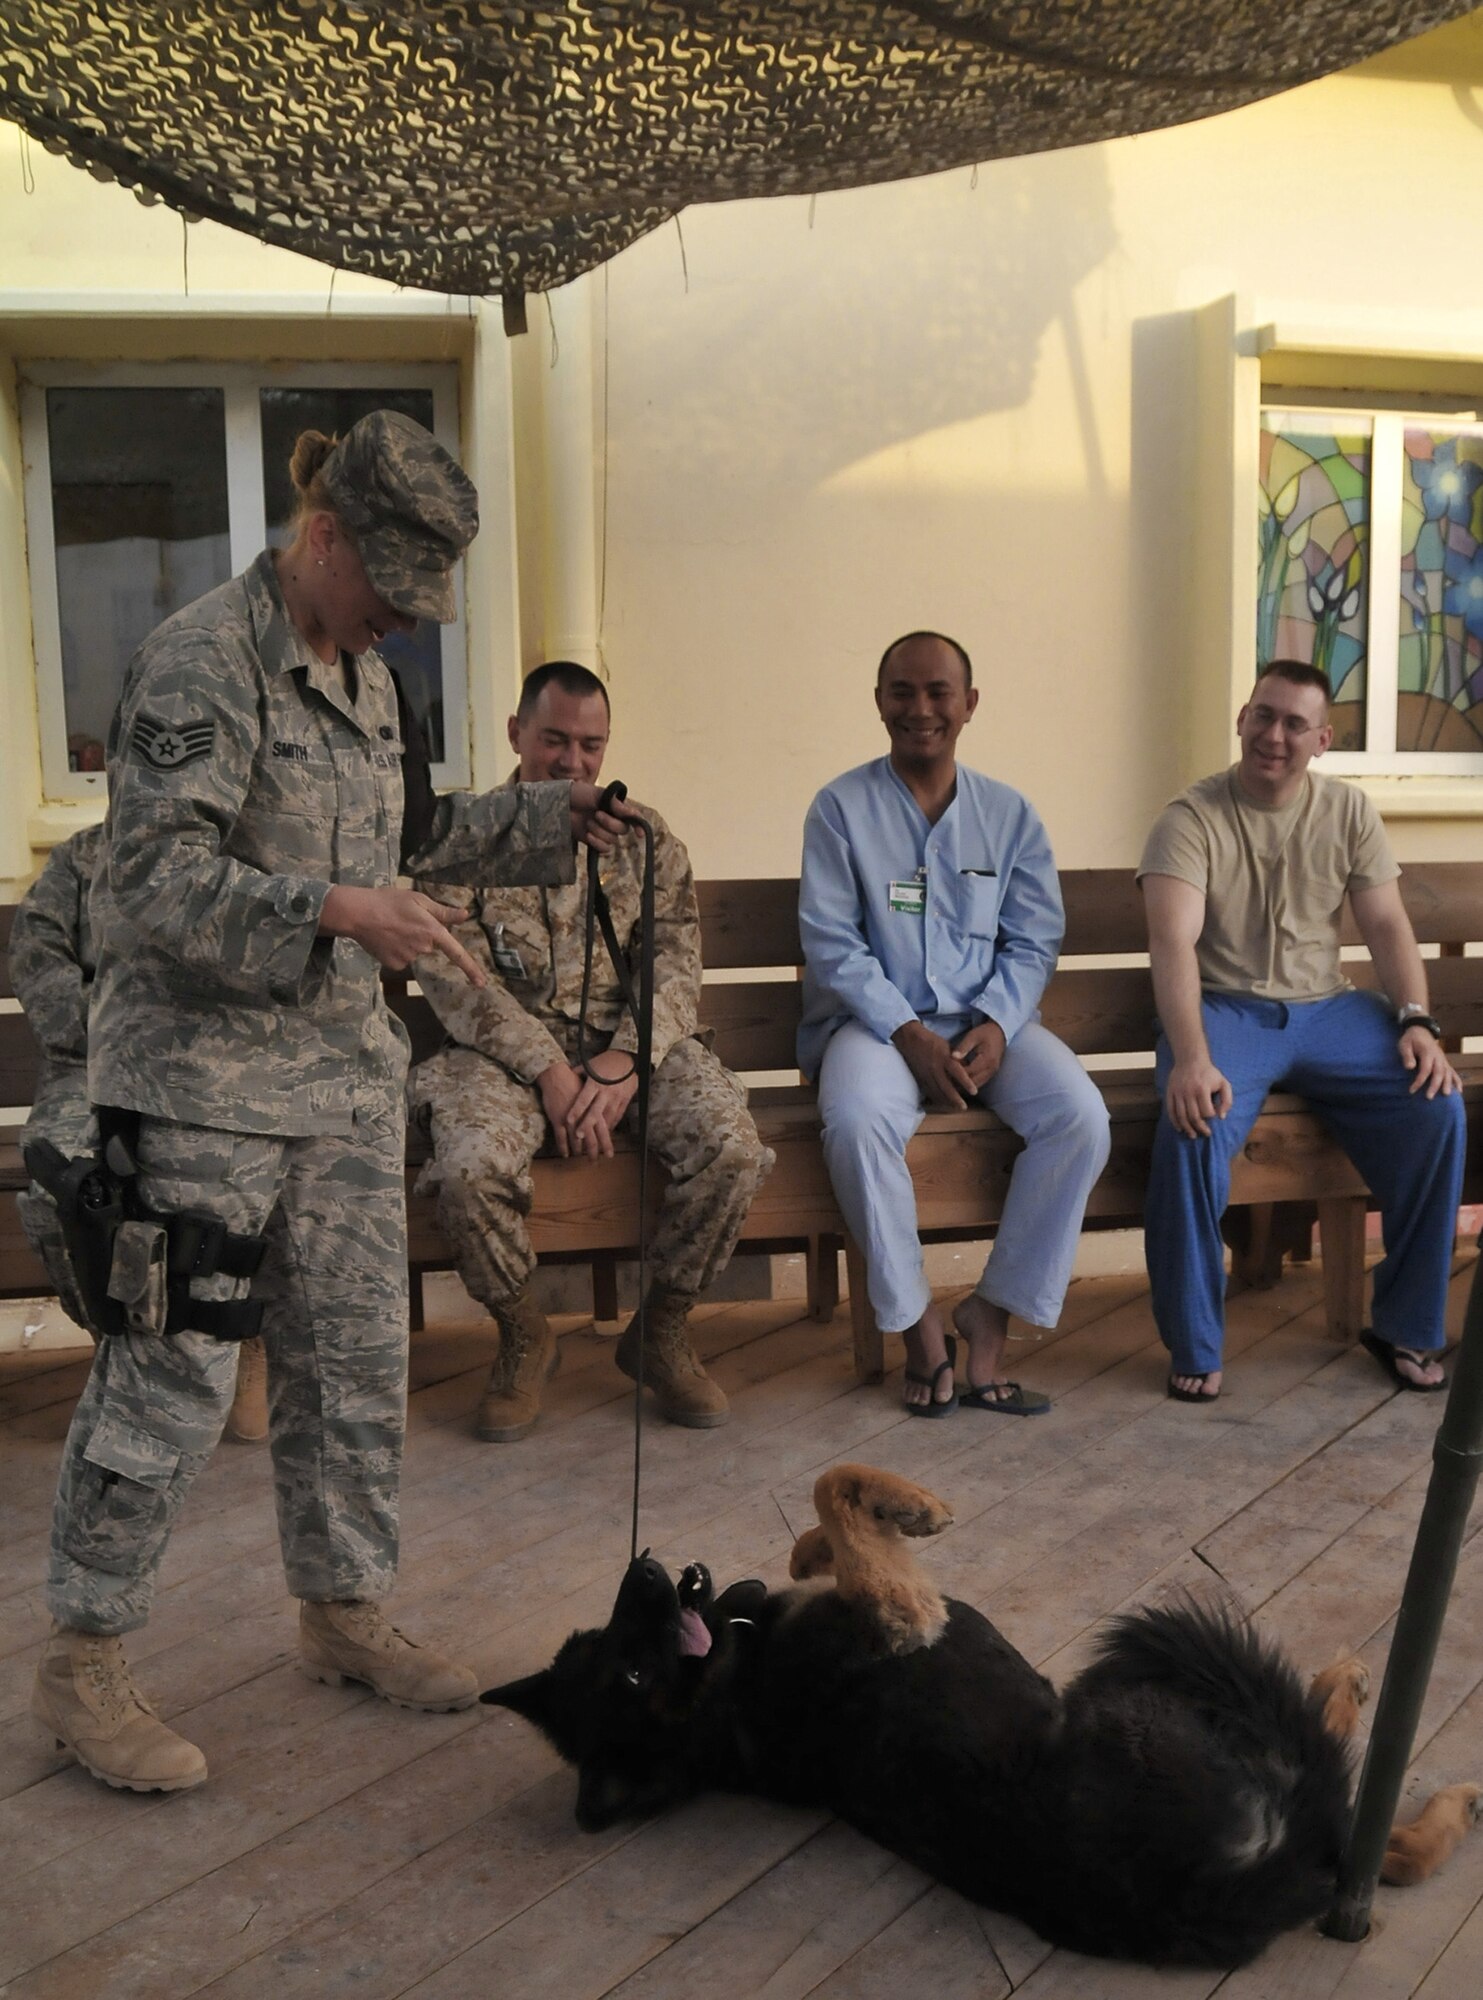 Staff Sgt. Kristen Smith and her explosives-detection military working dog, Cezar, put on a demonstration for patients at the Air Force Theater Hospital as part of the newly created K-9 Visitation Program May 15 at Joint Base Balad, Iraq. The program works to further patient recovery after injury or illness through animal-assisted therapy. Sergeant Smith is a 332nd Expeditionary Security Forces Group K-9 handler. She and her dog are deployed from McGuire Air Force Base, N.J. Sergeant Smith is a native of Johnstown, Pa. (U.S. Air Force photo/Staff Sgt. Dilia Ayala) 
